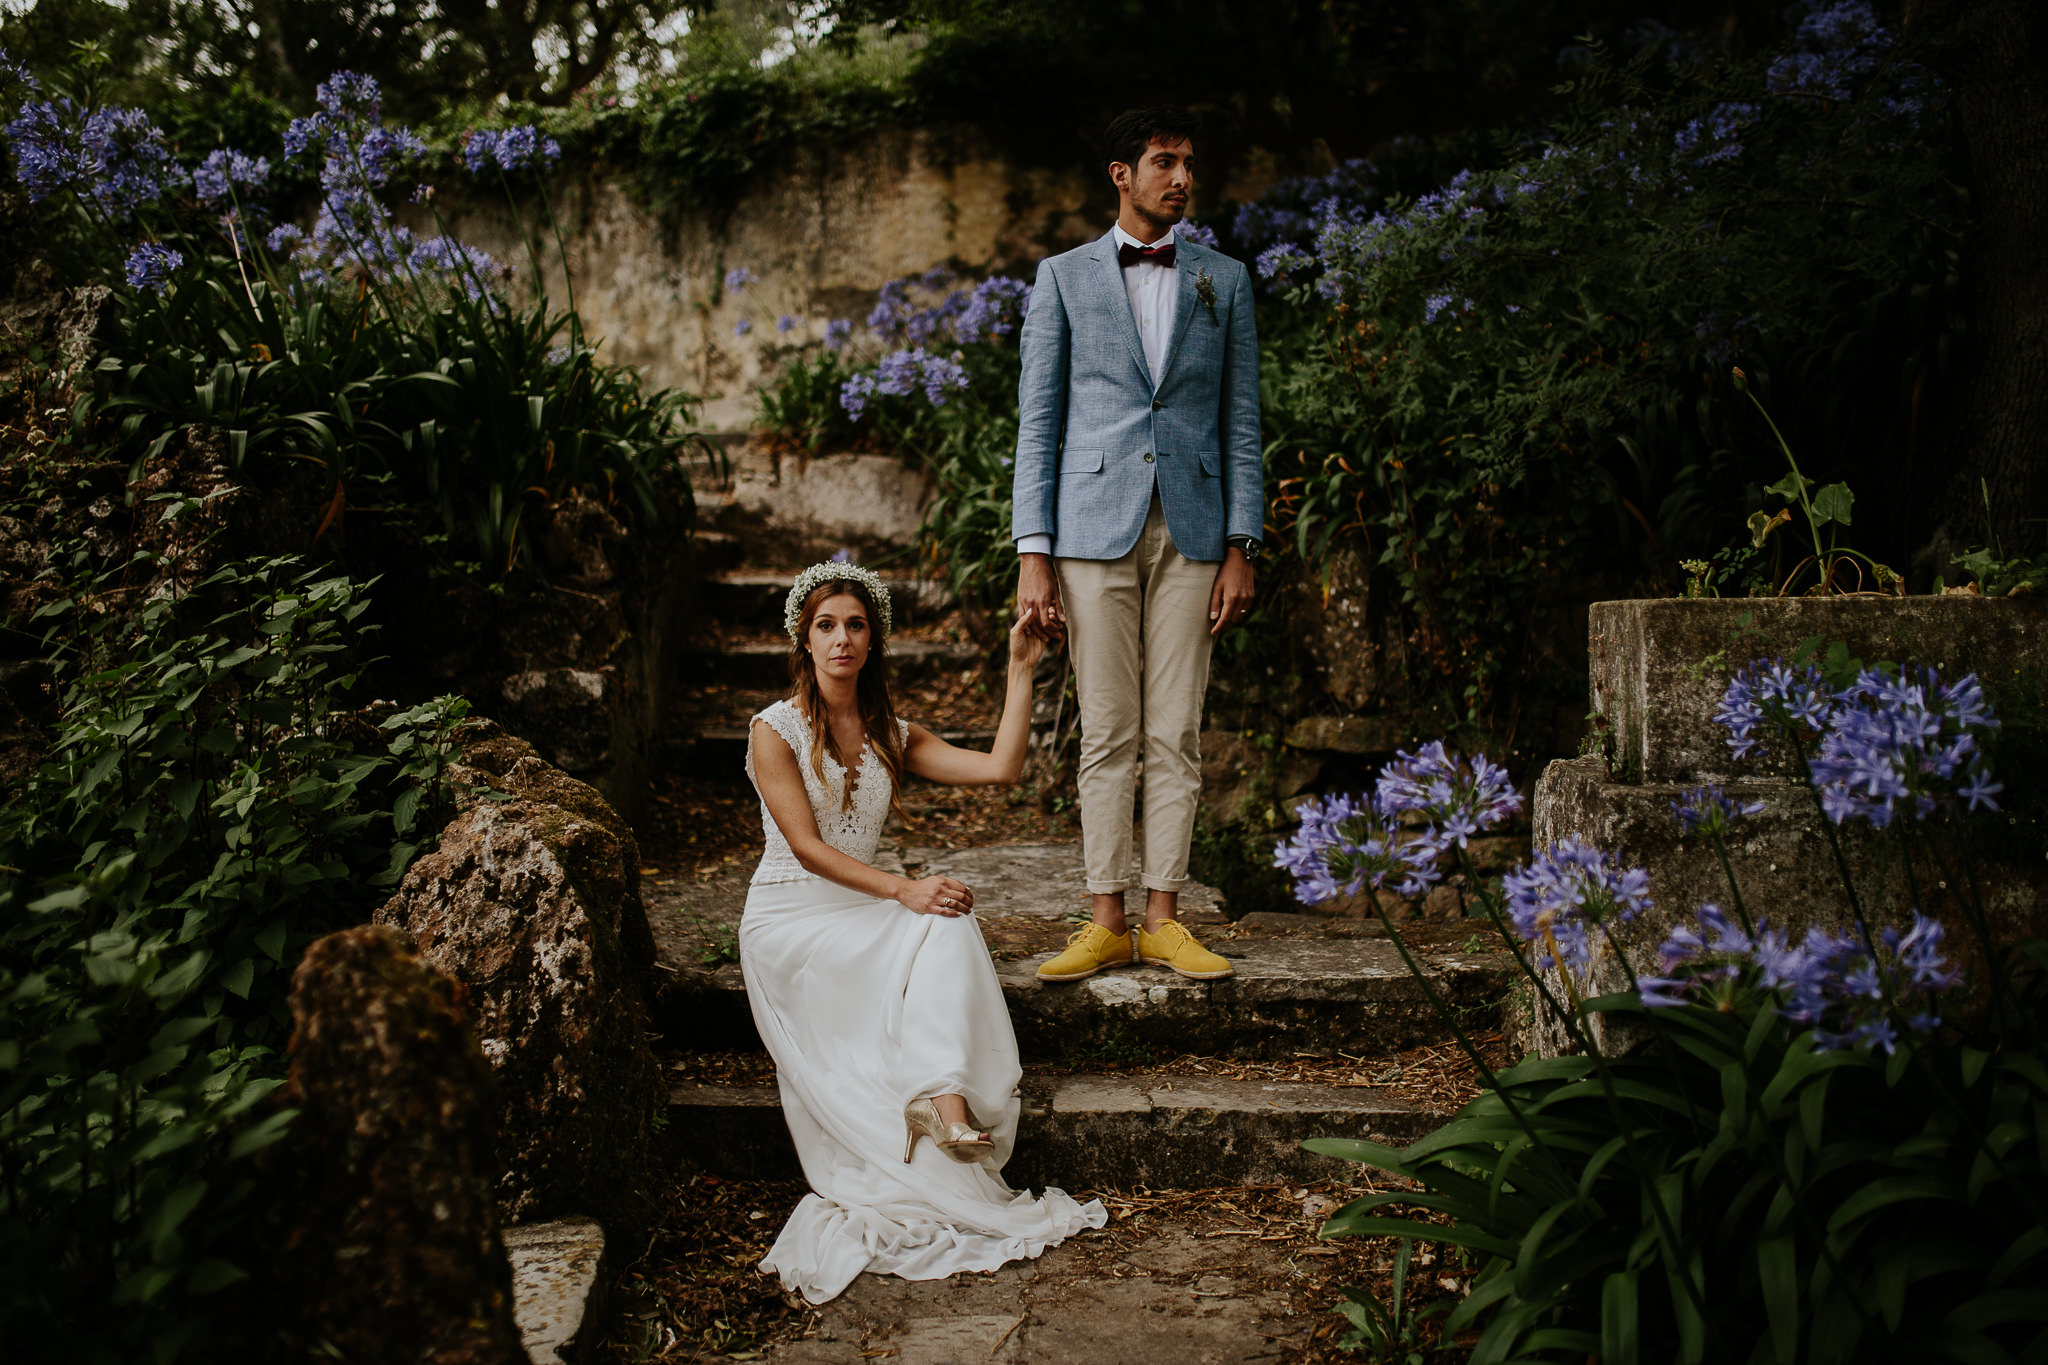 Posed portrait of sited bride and stand up groom on a garden